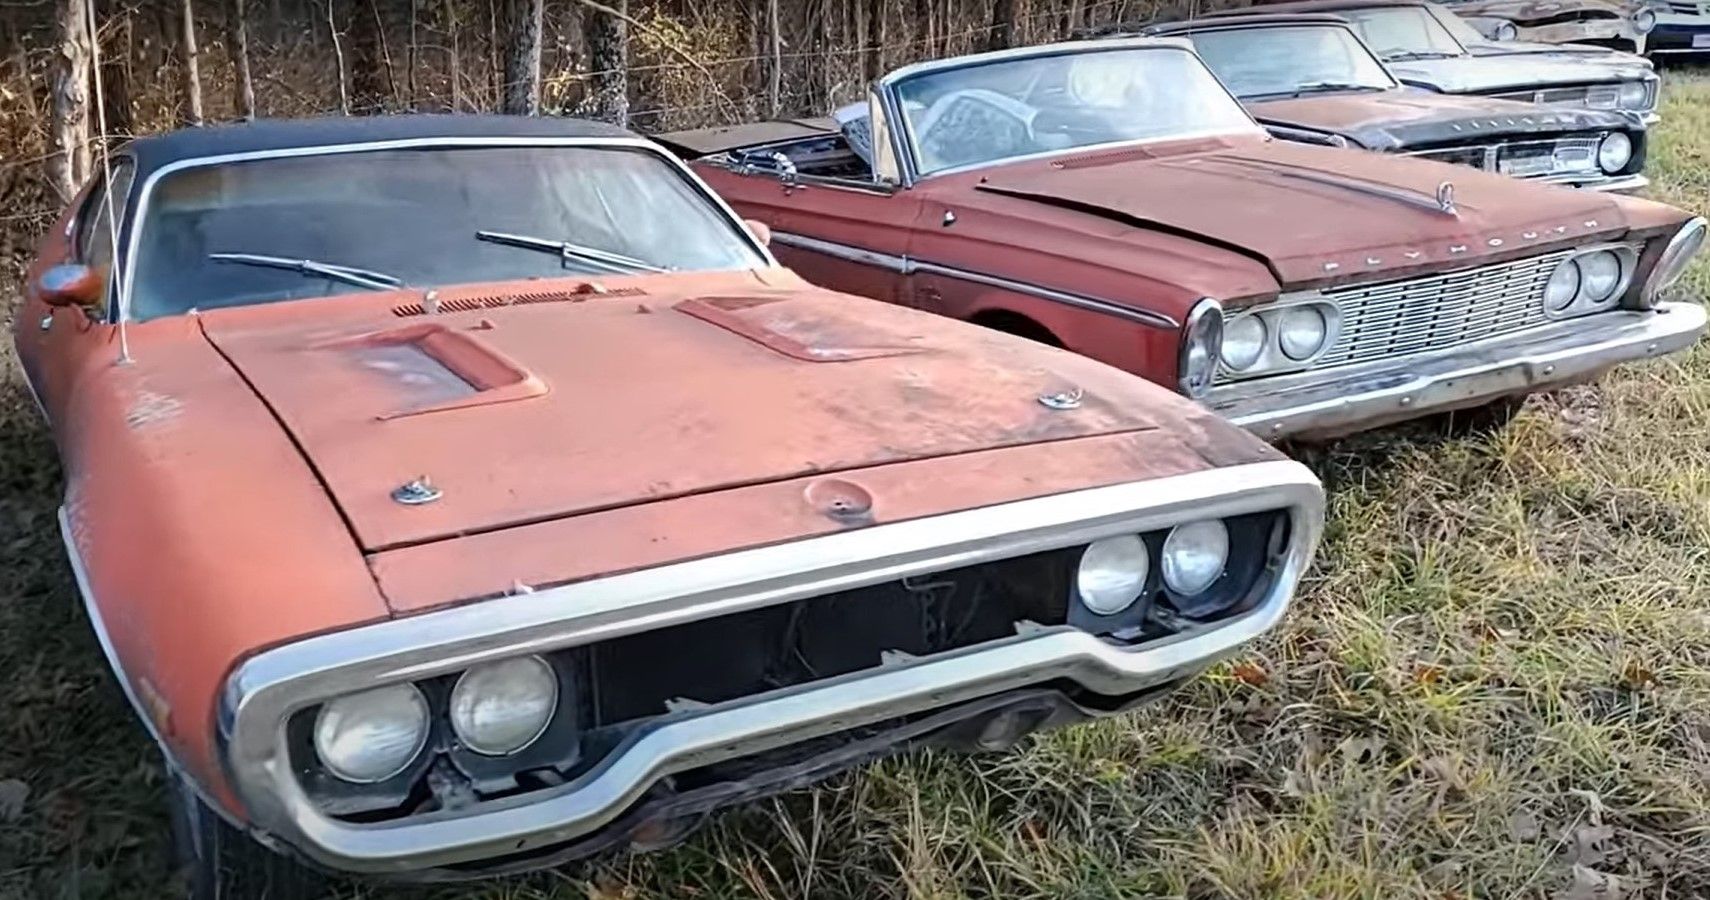 The Auto Archaeologist Discovers A Farmyard Full Of Mopar Muscle Cars